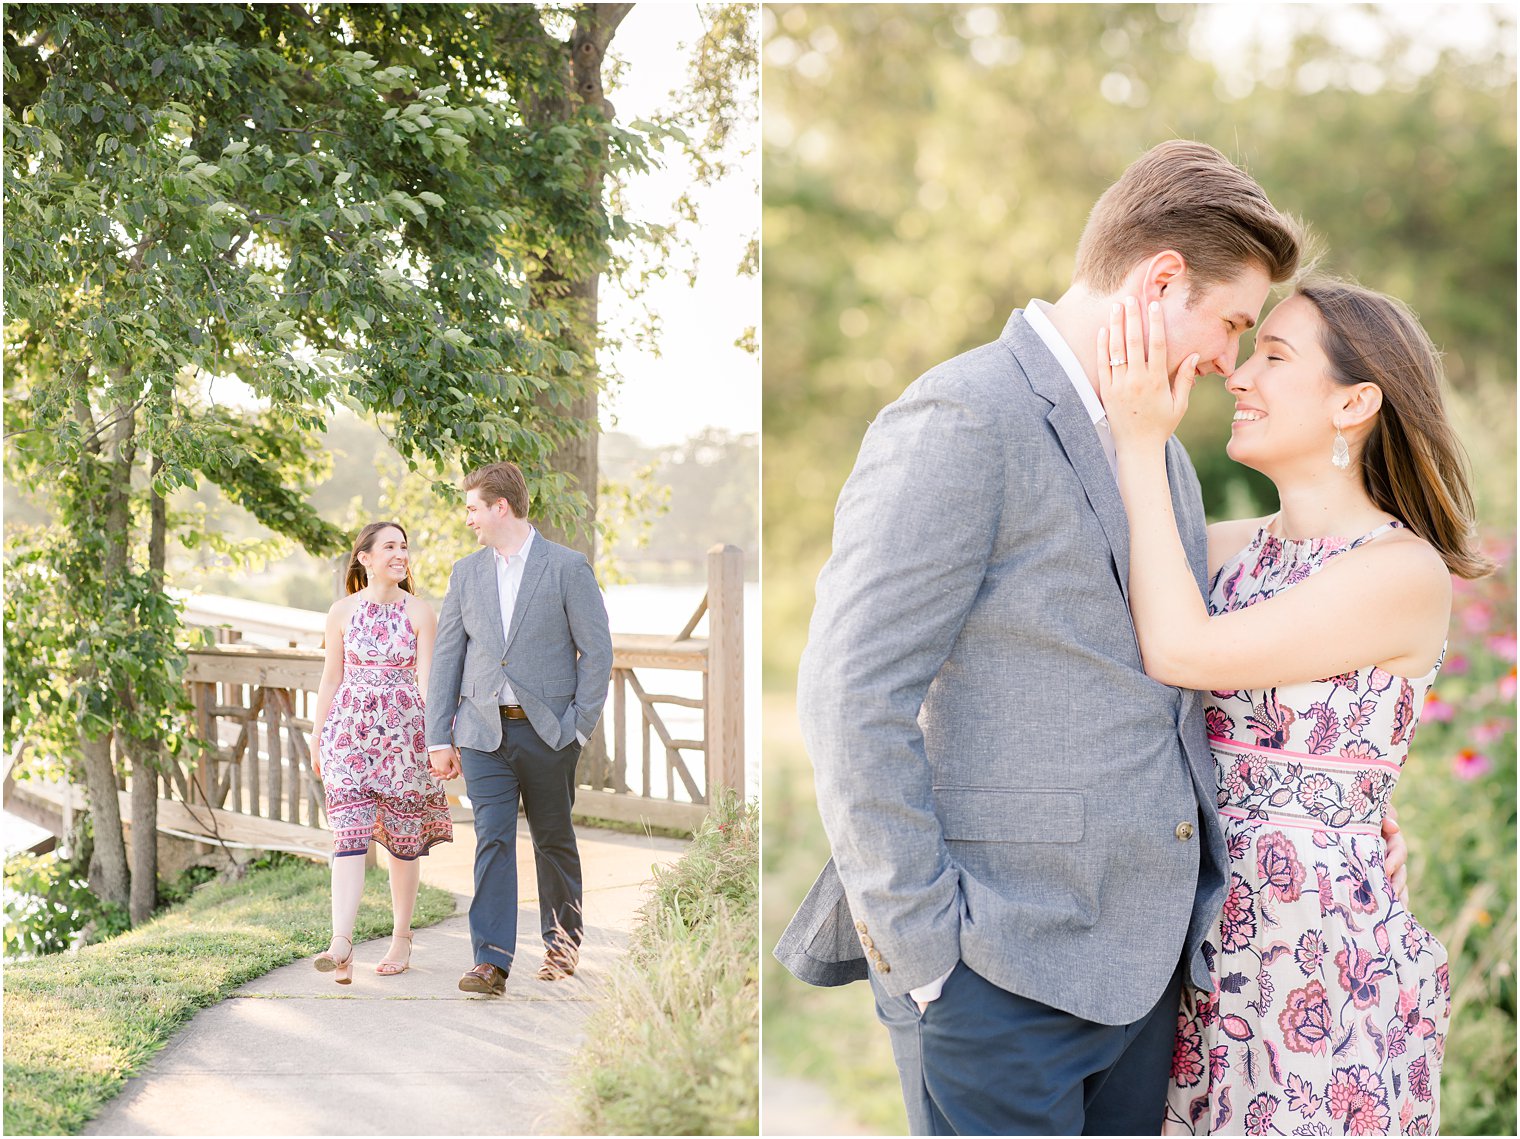 Bride wearing floral dress for engagement photos